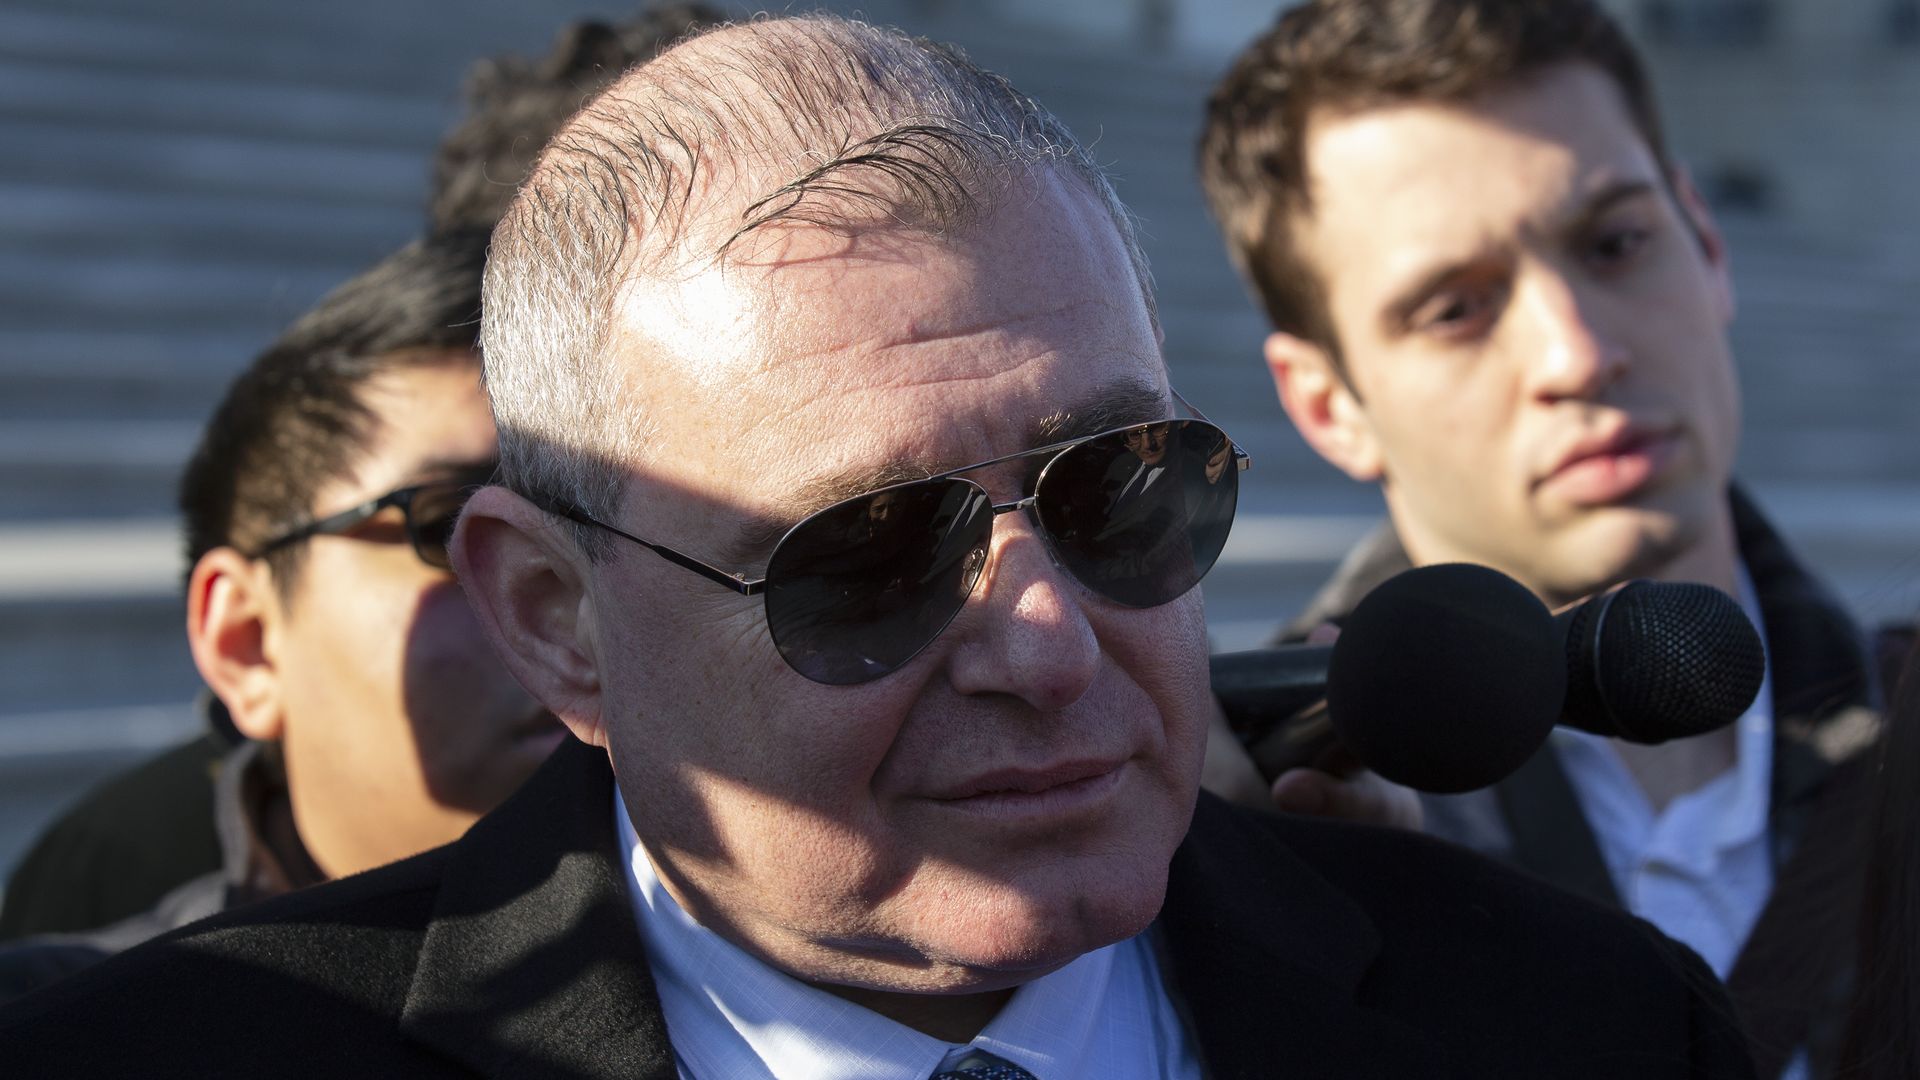 Photo of Lev Parnas wearing sunglasses and standing with two others